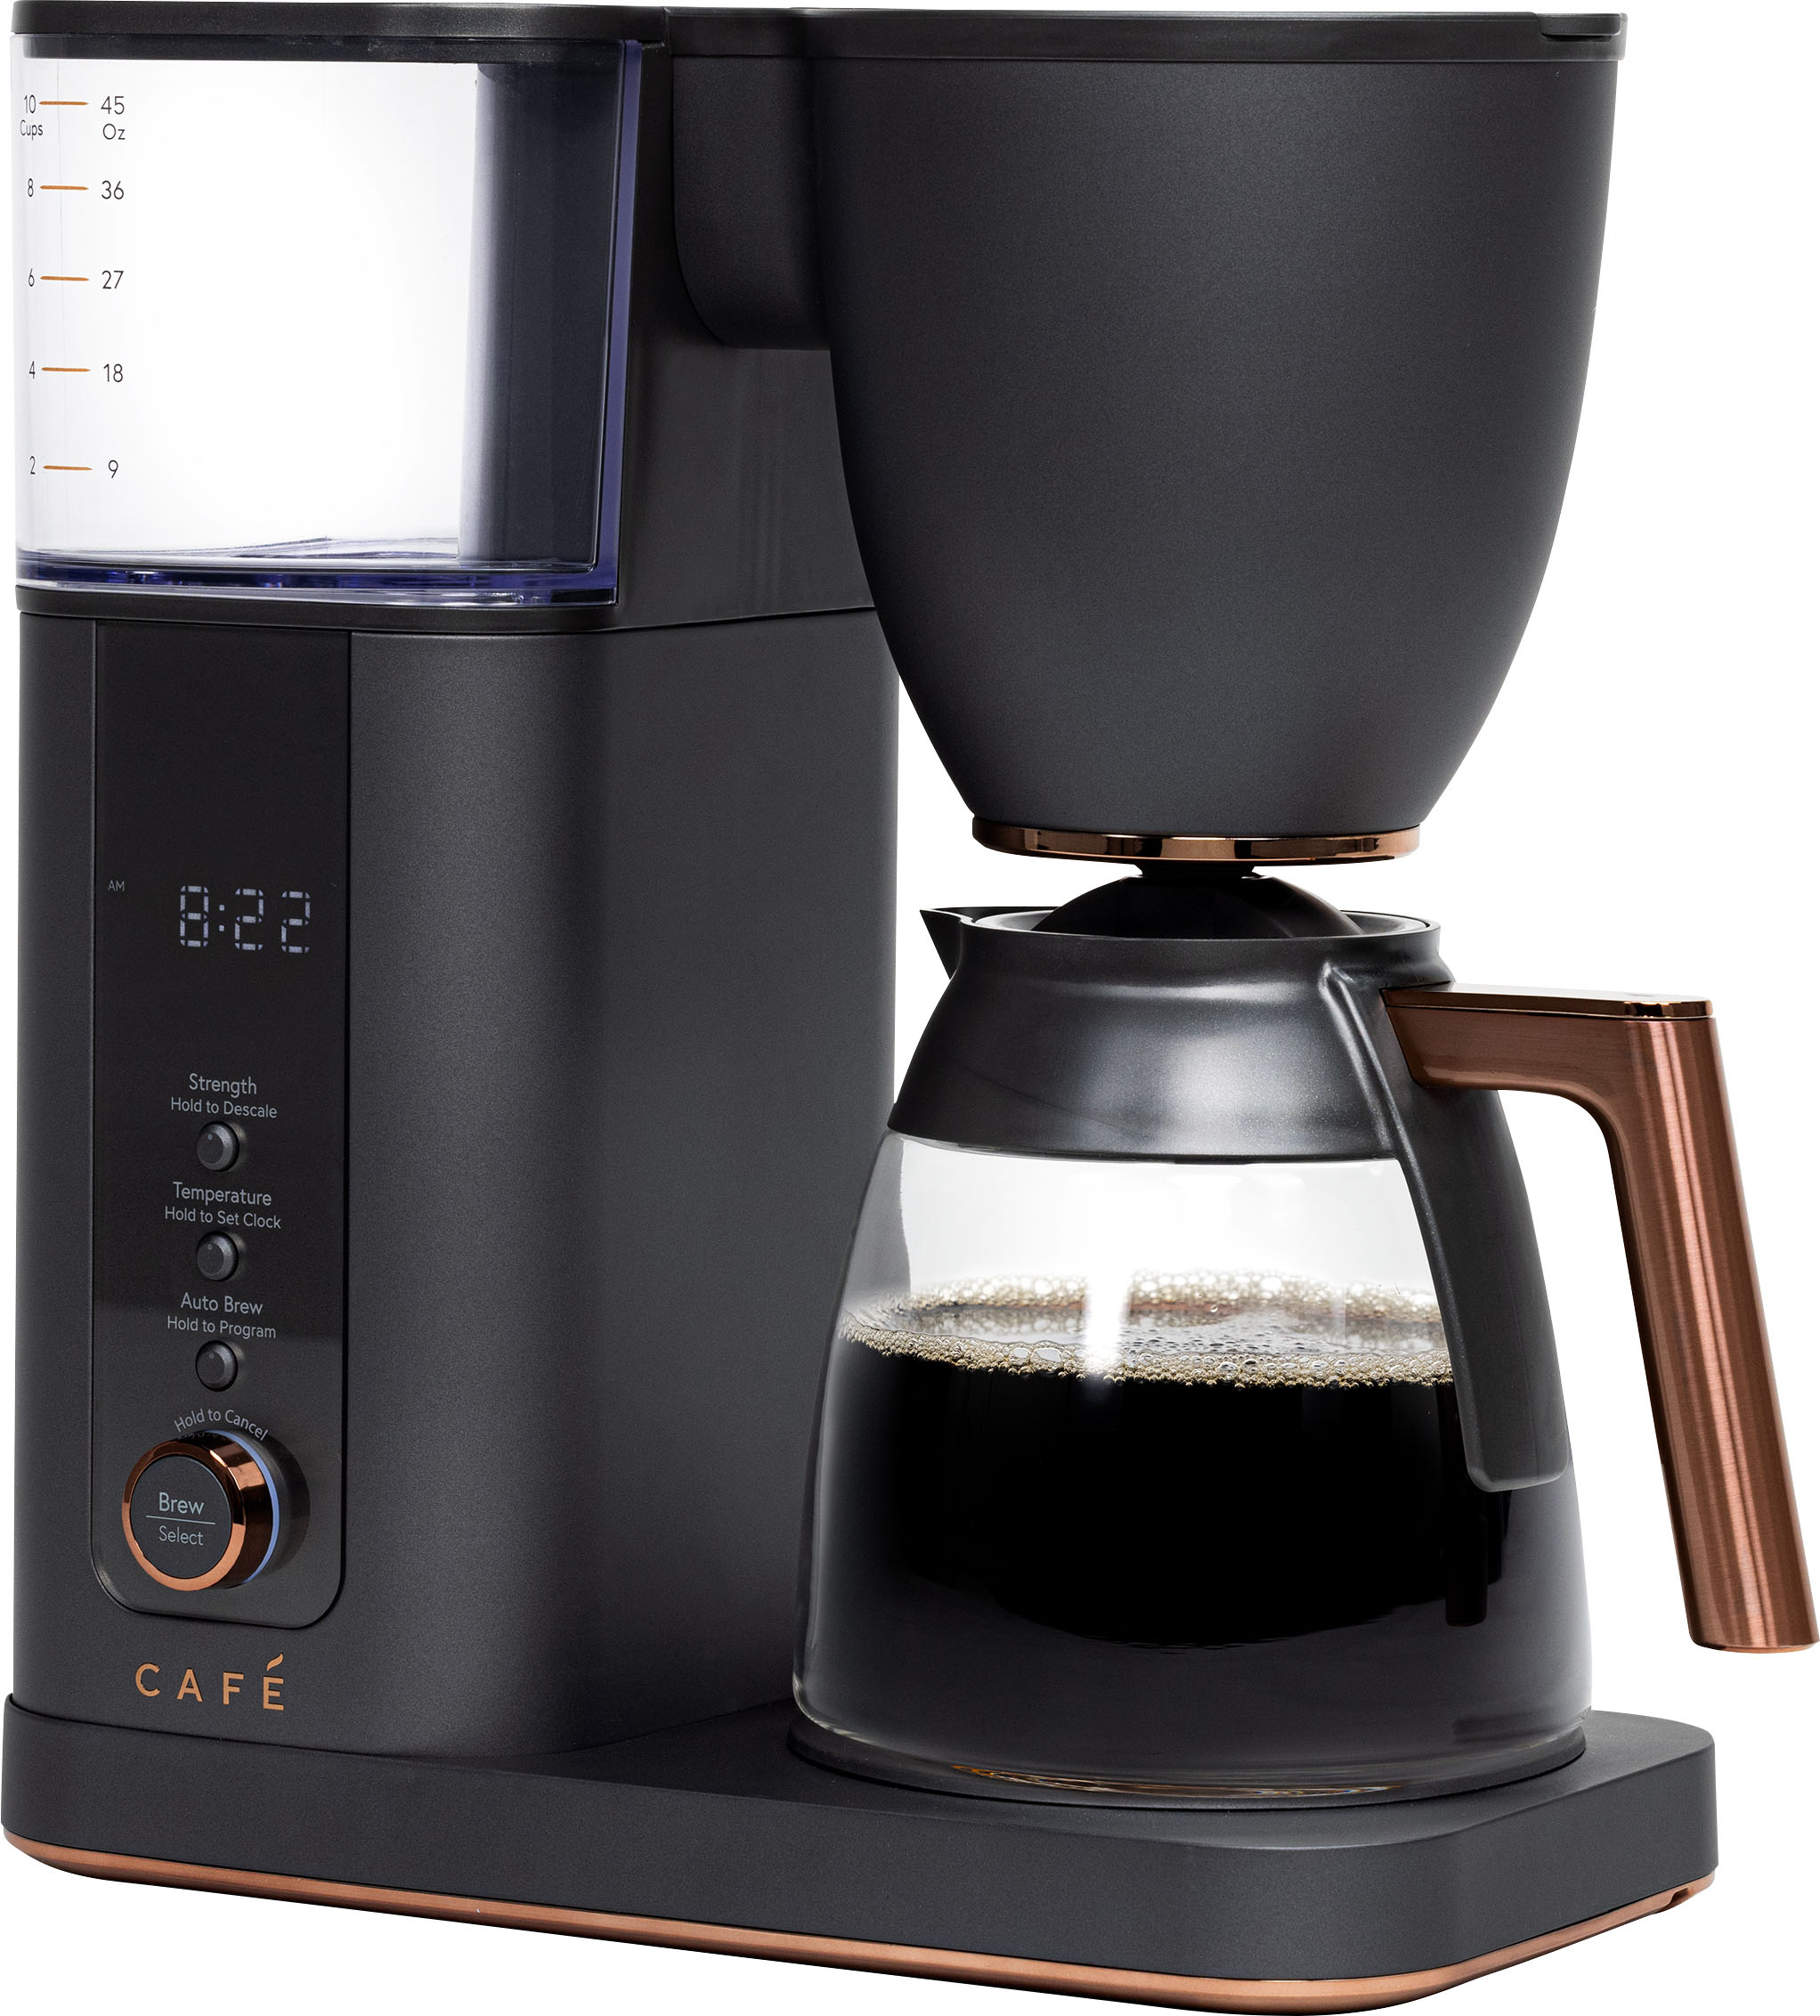 Angle View: Café - Smart Drip 10-Cup Coffee Maker with WiFi - Matte Black